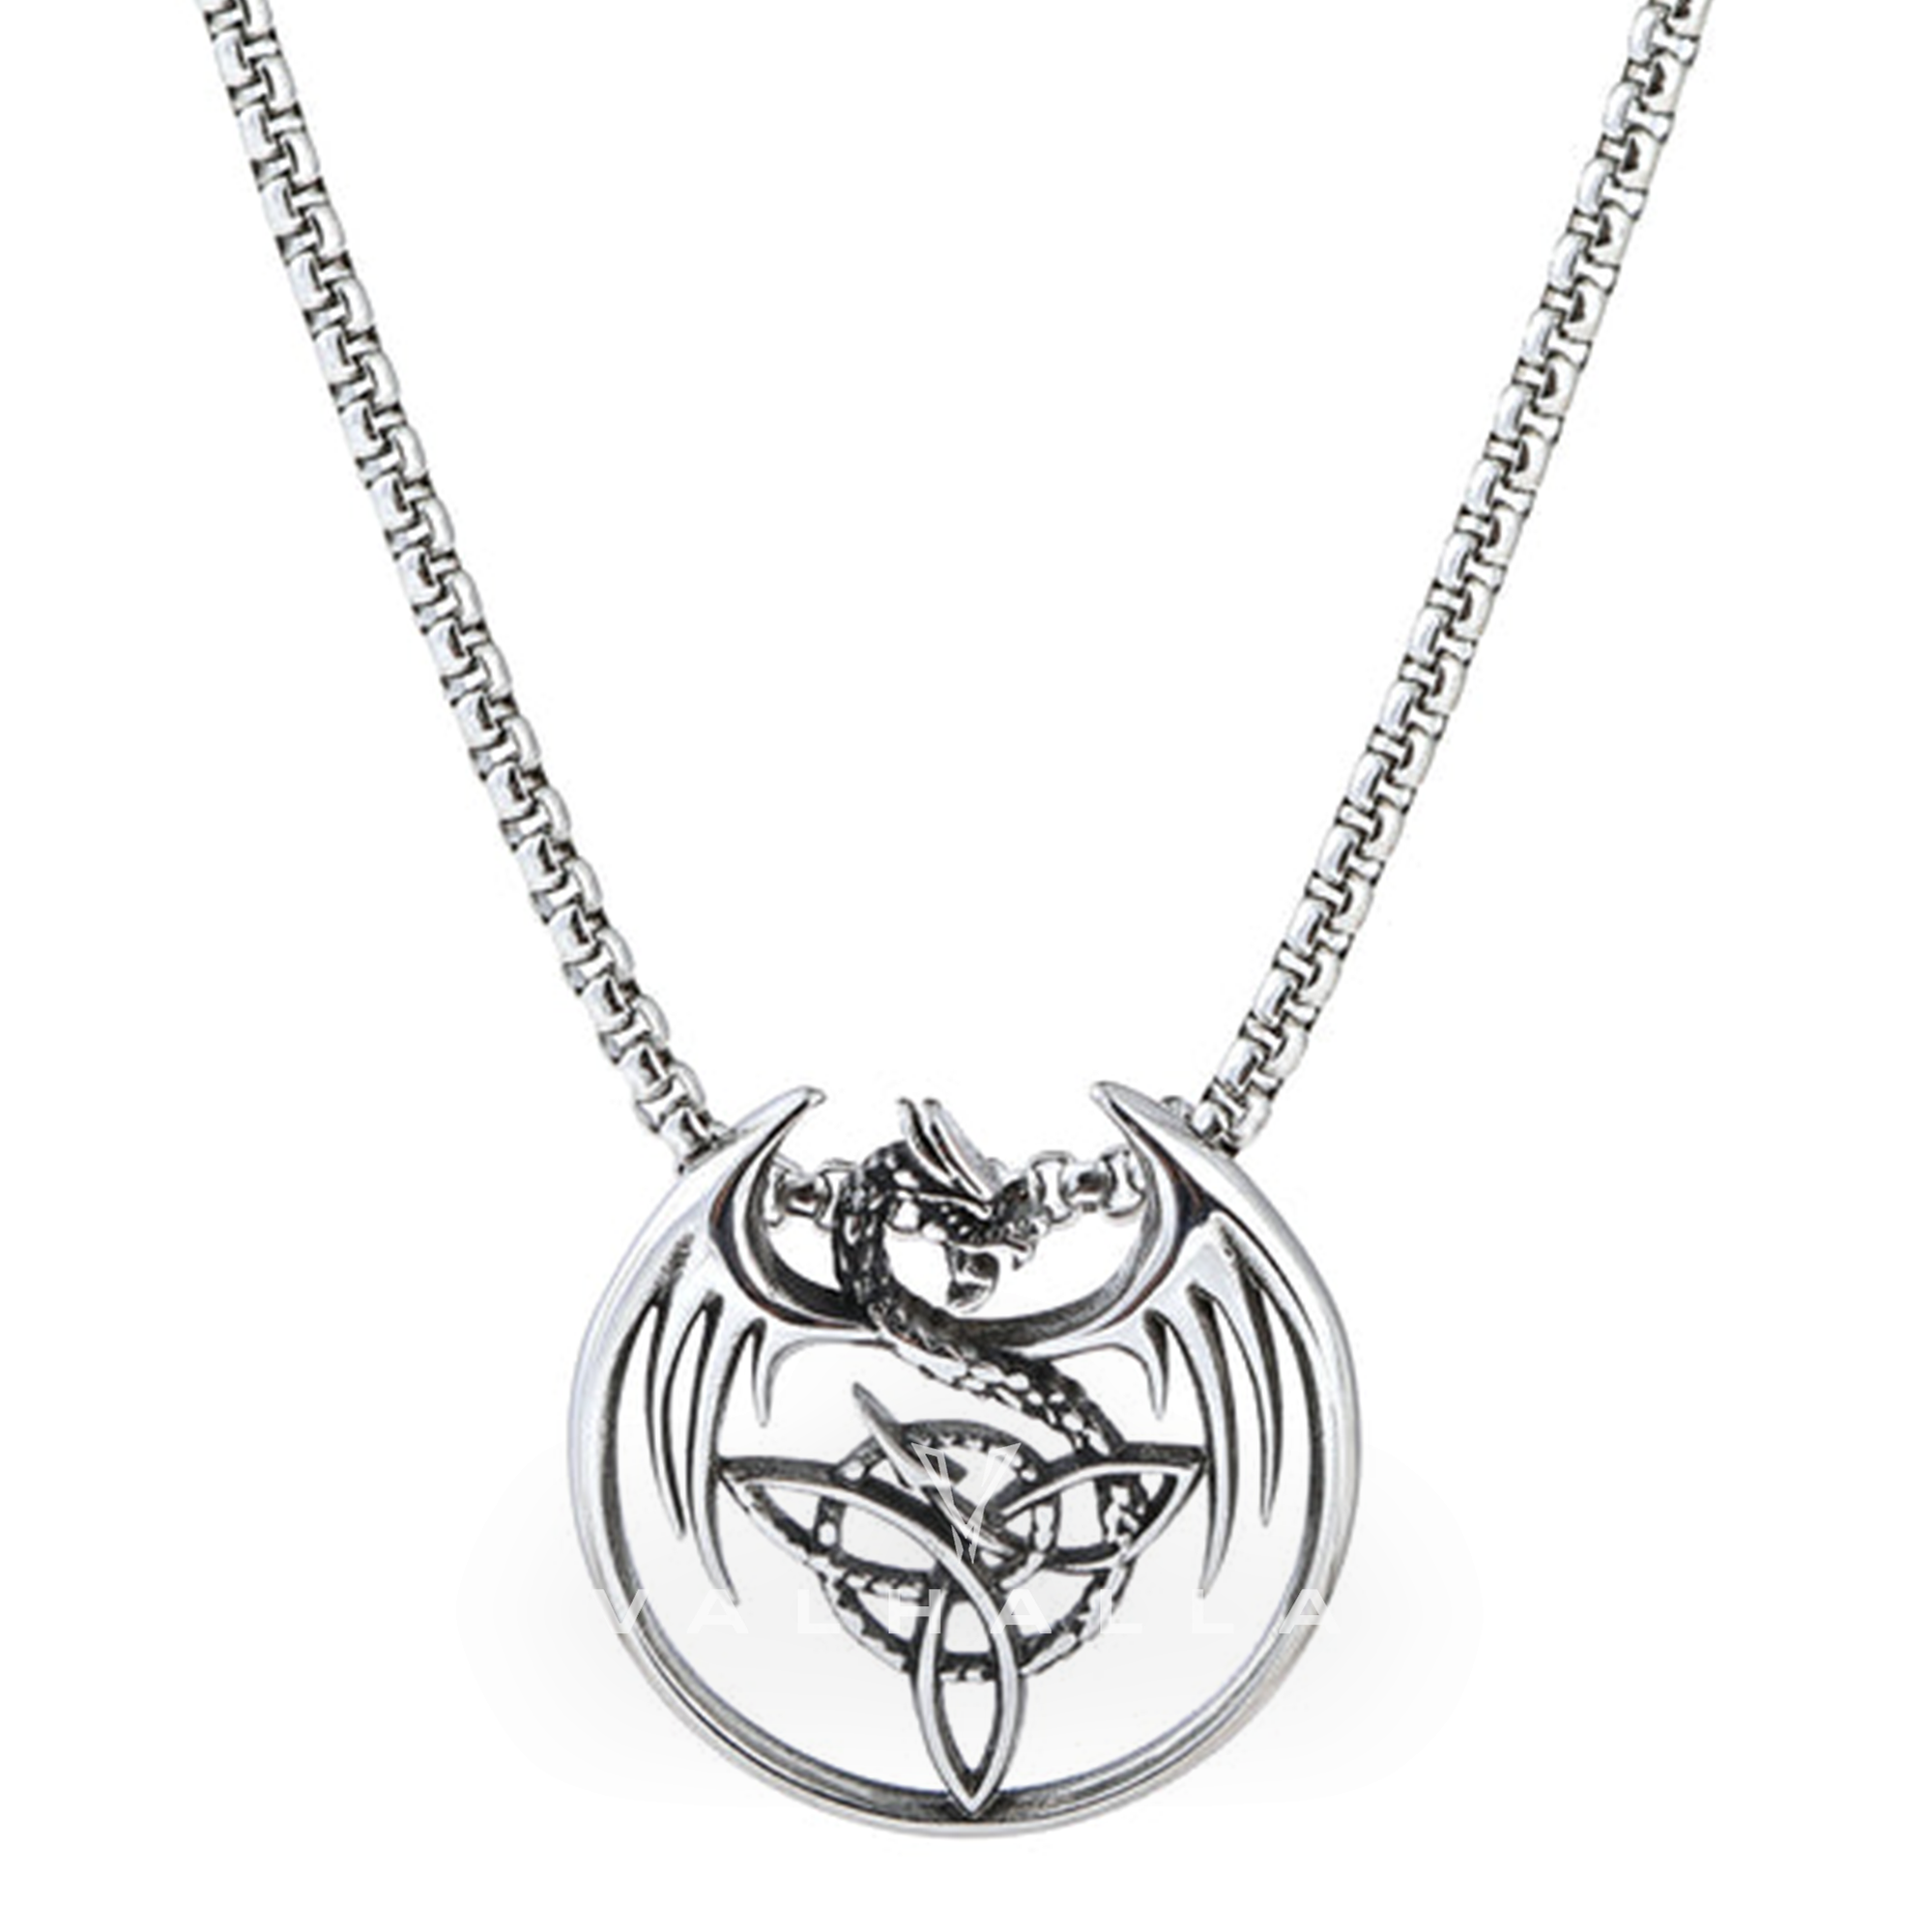 Norse Celtic Dragon Stainless Steel Pendant & Chain